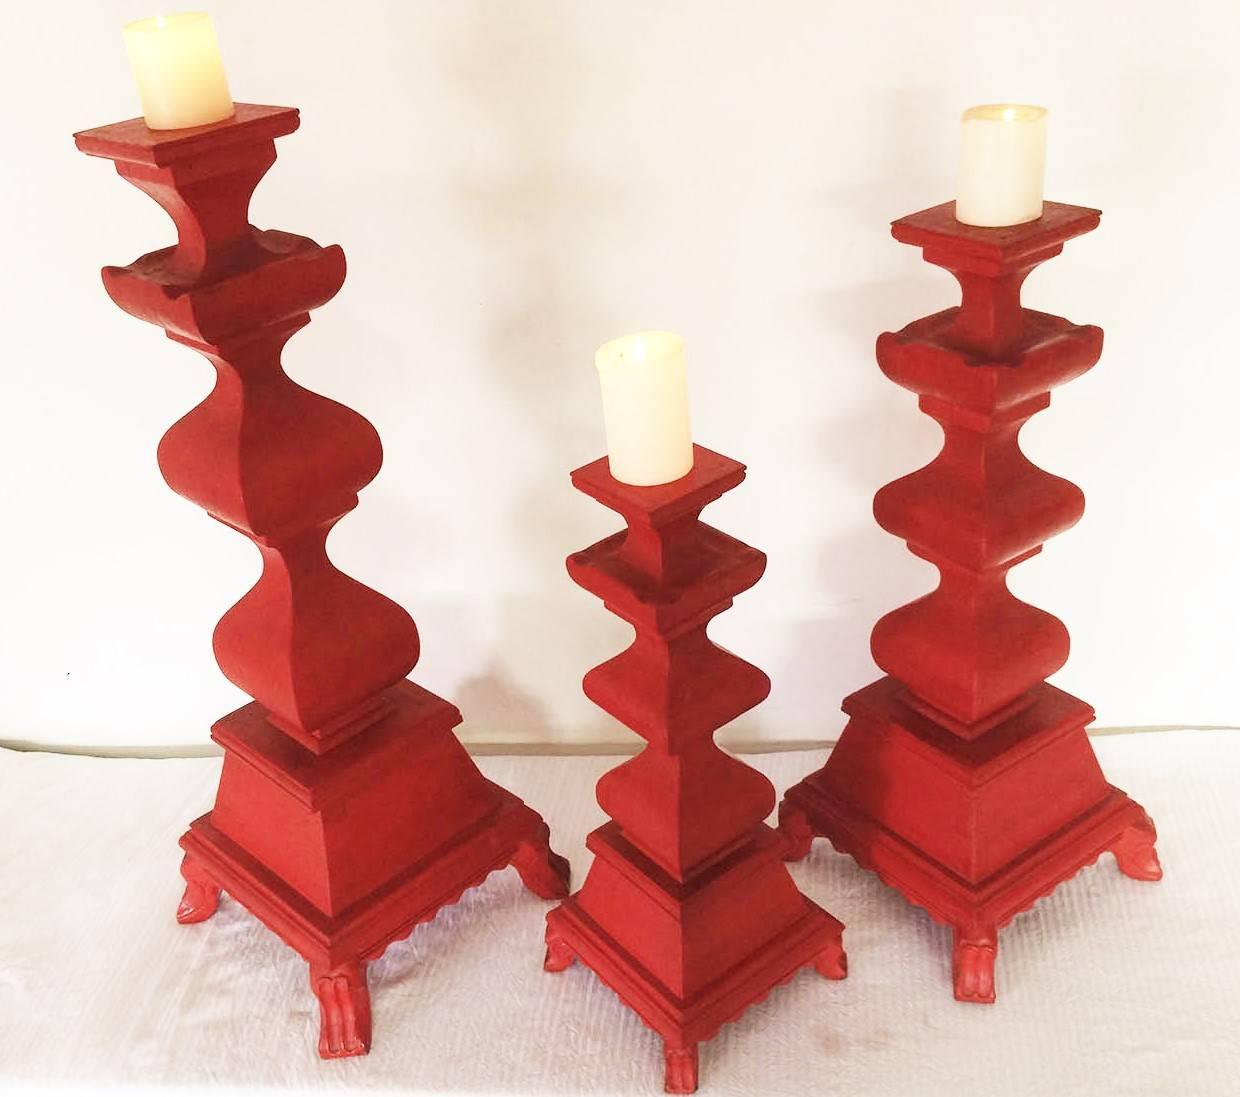 These set of three hand-carved wood candleholders are a replica of a neoclassic style blandones and have been painted with a beautiful bright red color to give them a contemporary look.
They could be used as candleholders or could be turned in to